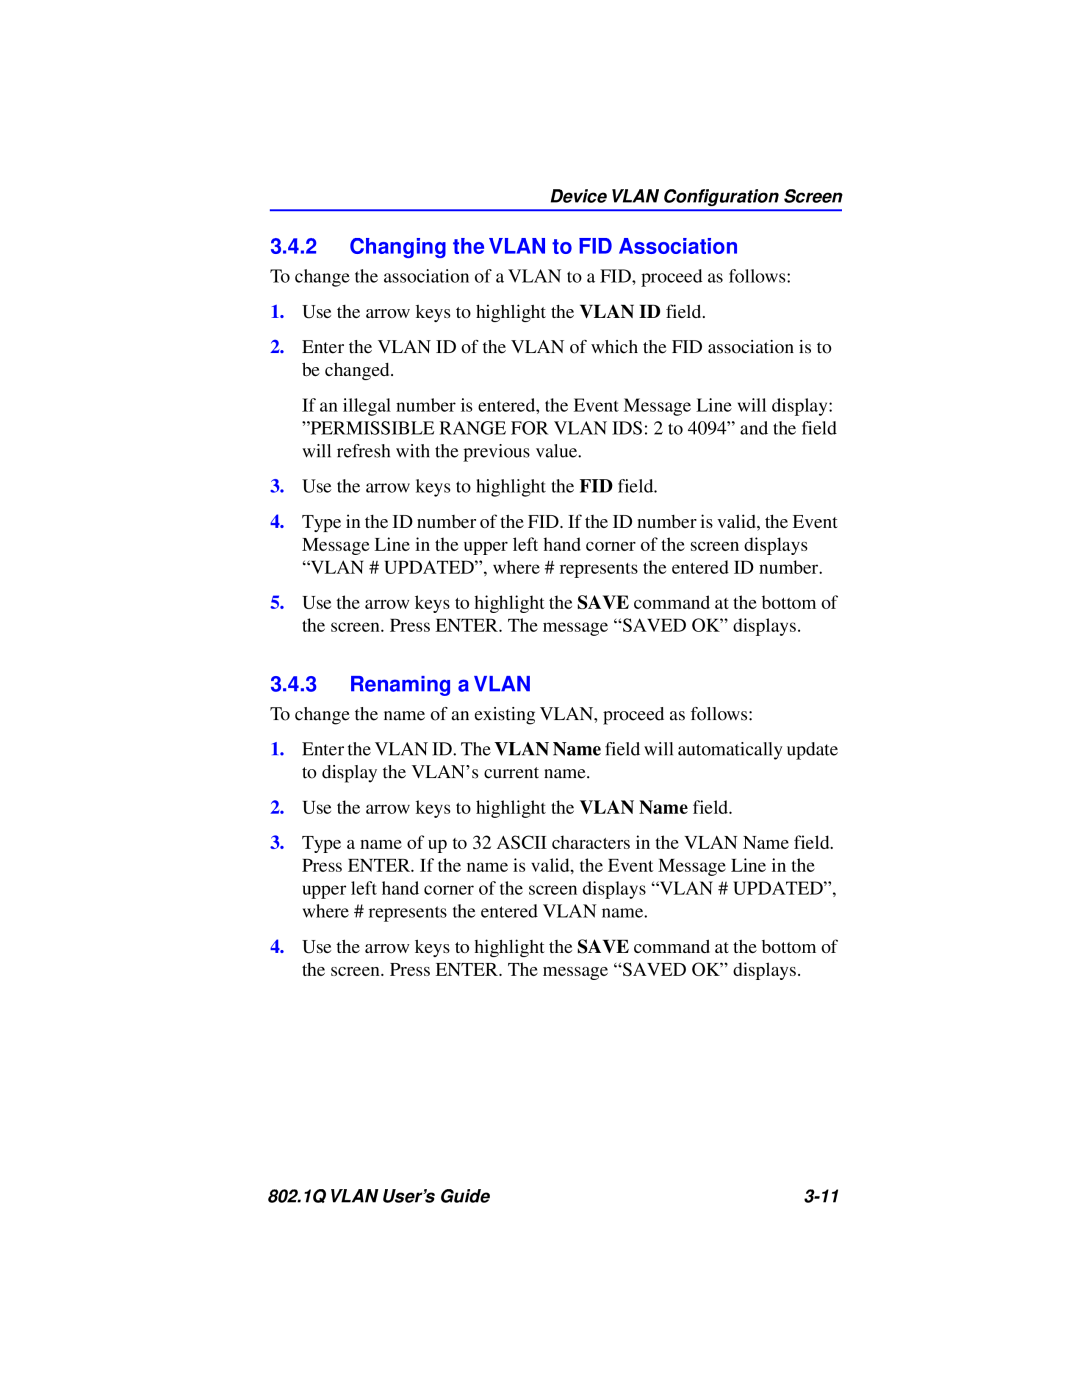 Cabletron Systems 802.1Q manual Changing the VLAN to FID Association, Renaming a VLAN 